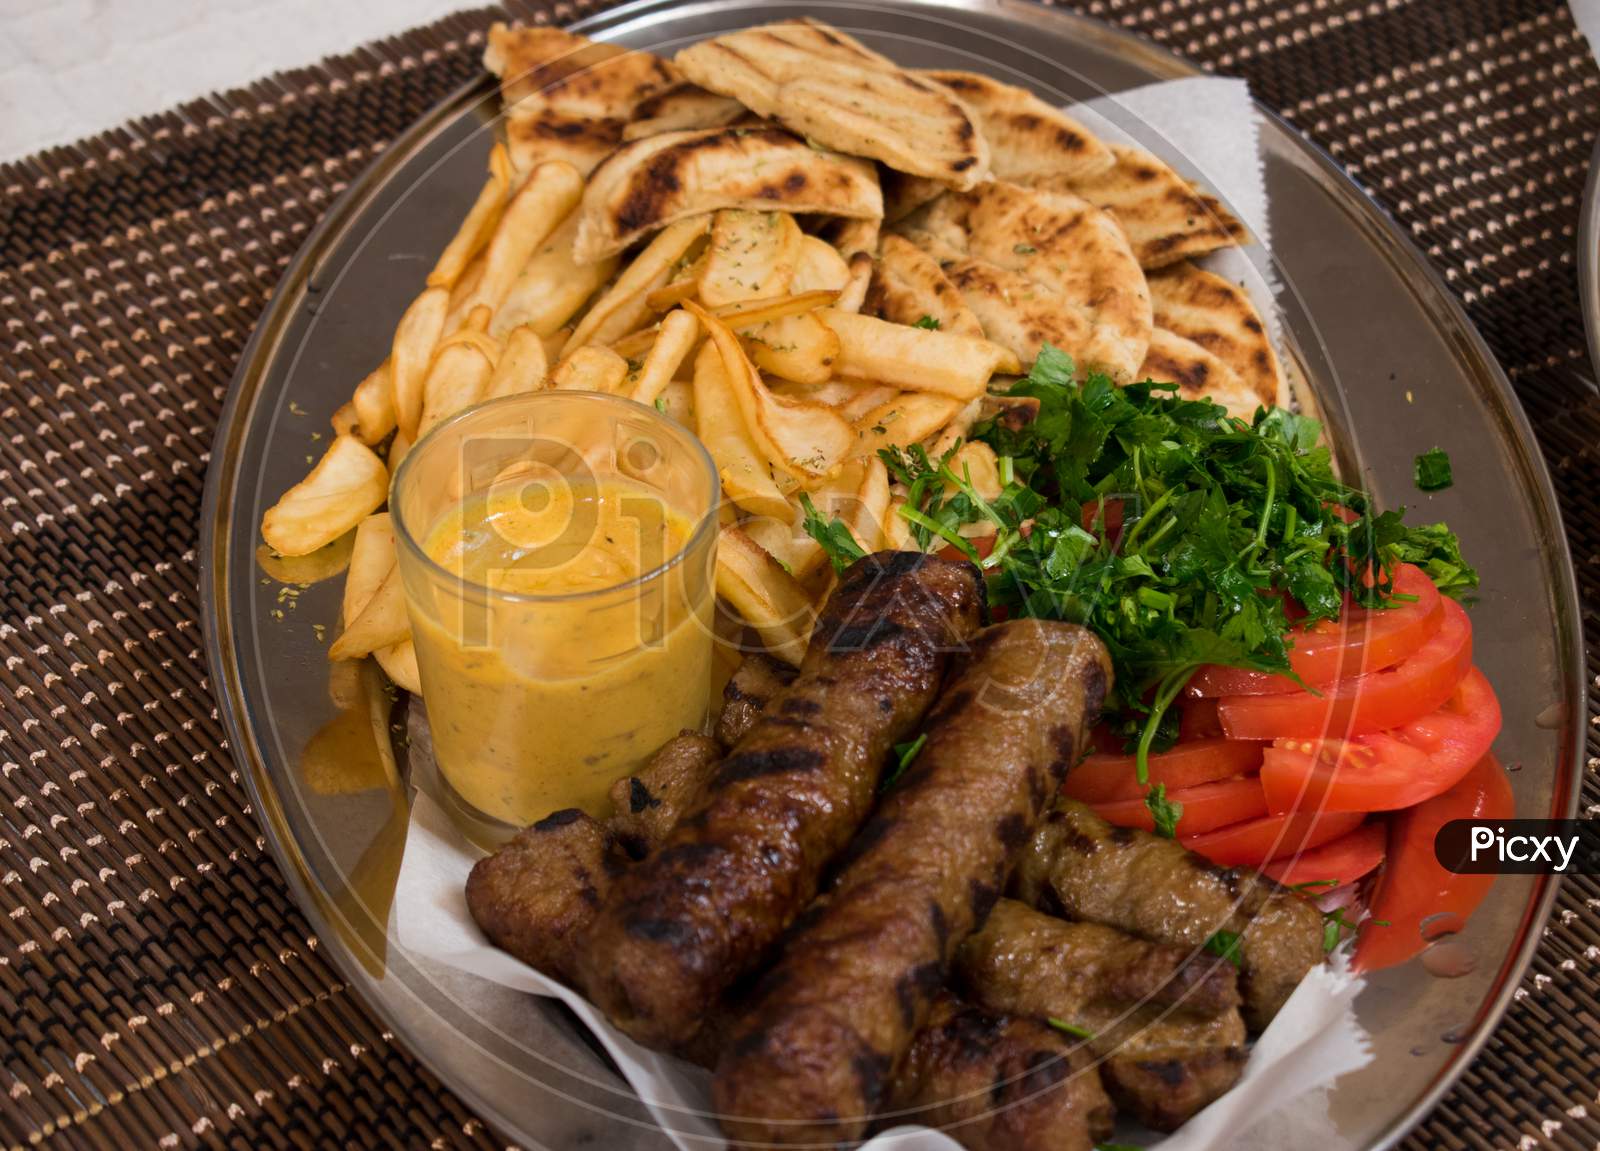 Traditional Lamp Kebab With Fresh Salad, Potatoes And Sauce In Plate